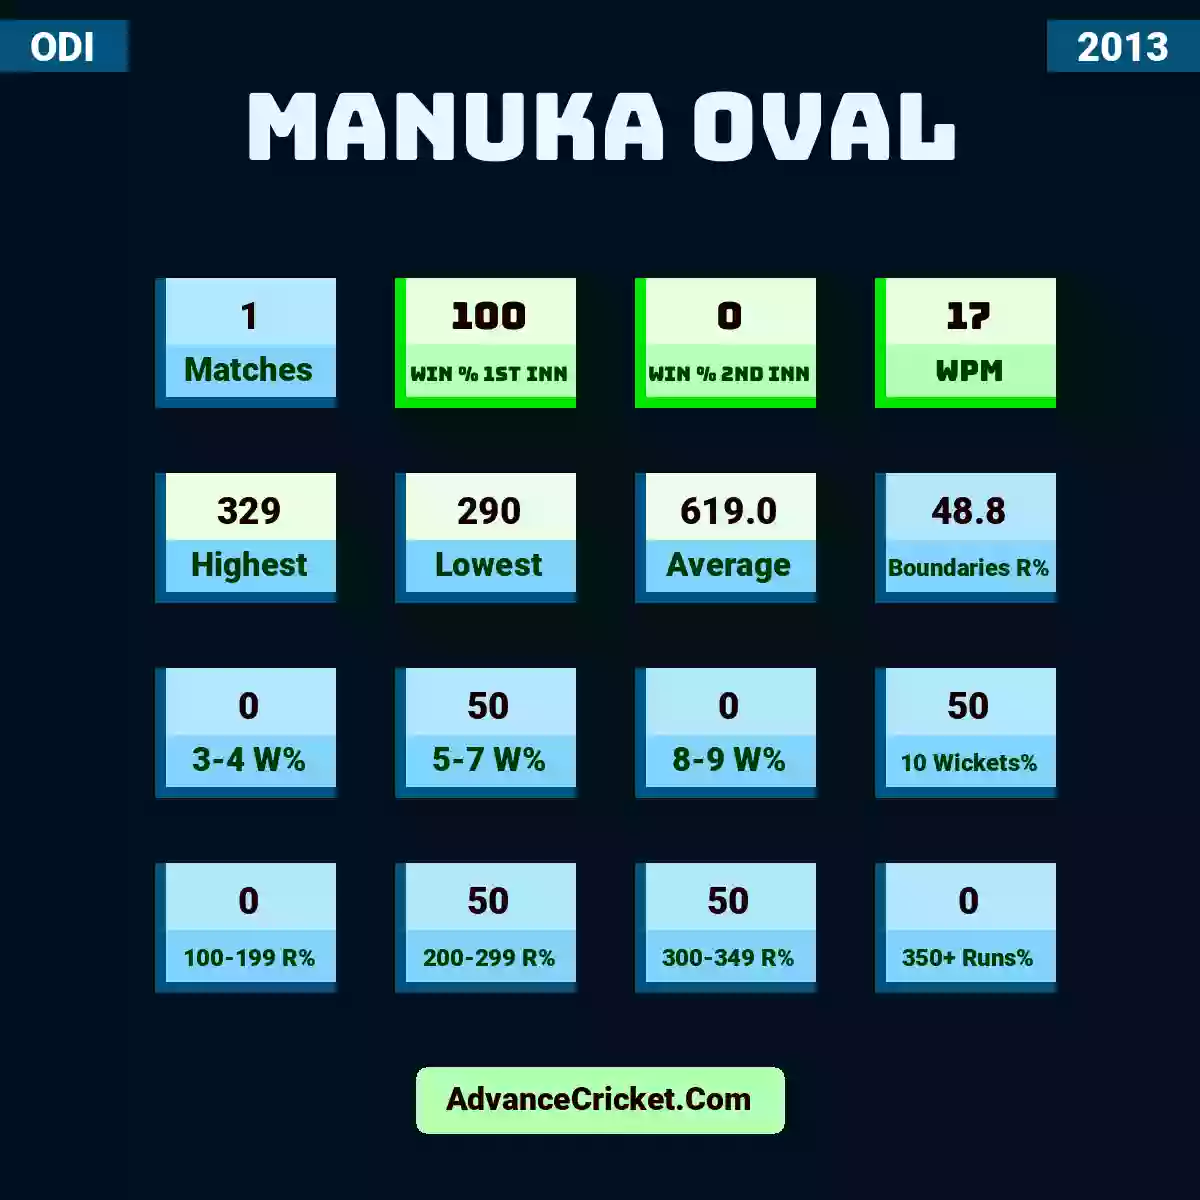 Image showing Manuka Oval with Matches: 1, Win % 1st Inn: 100, Win % 2nd Inn: 0, WPM: 17, Highest: 329, Lowest: 290, Average: 619.0, Boundaries R%: 48.8, 3-4 W%: 0, 5-7 W%: 50, 8-9 W%: 0, 10 Wickets%: 50, 100-199 R%: 0, 200-299 R%: 50, 300-349 R%: 50, 350+ Runs%: 0.